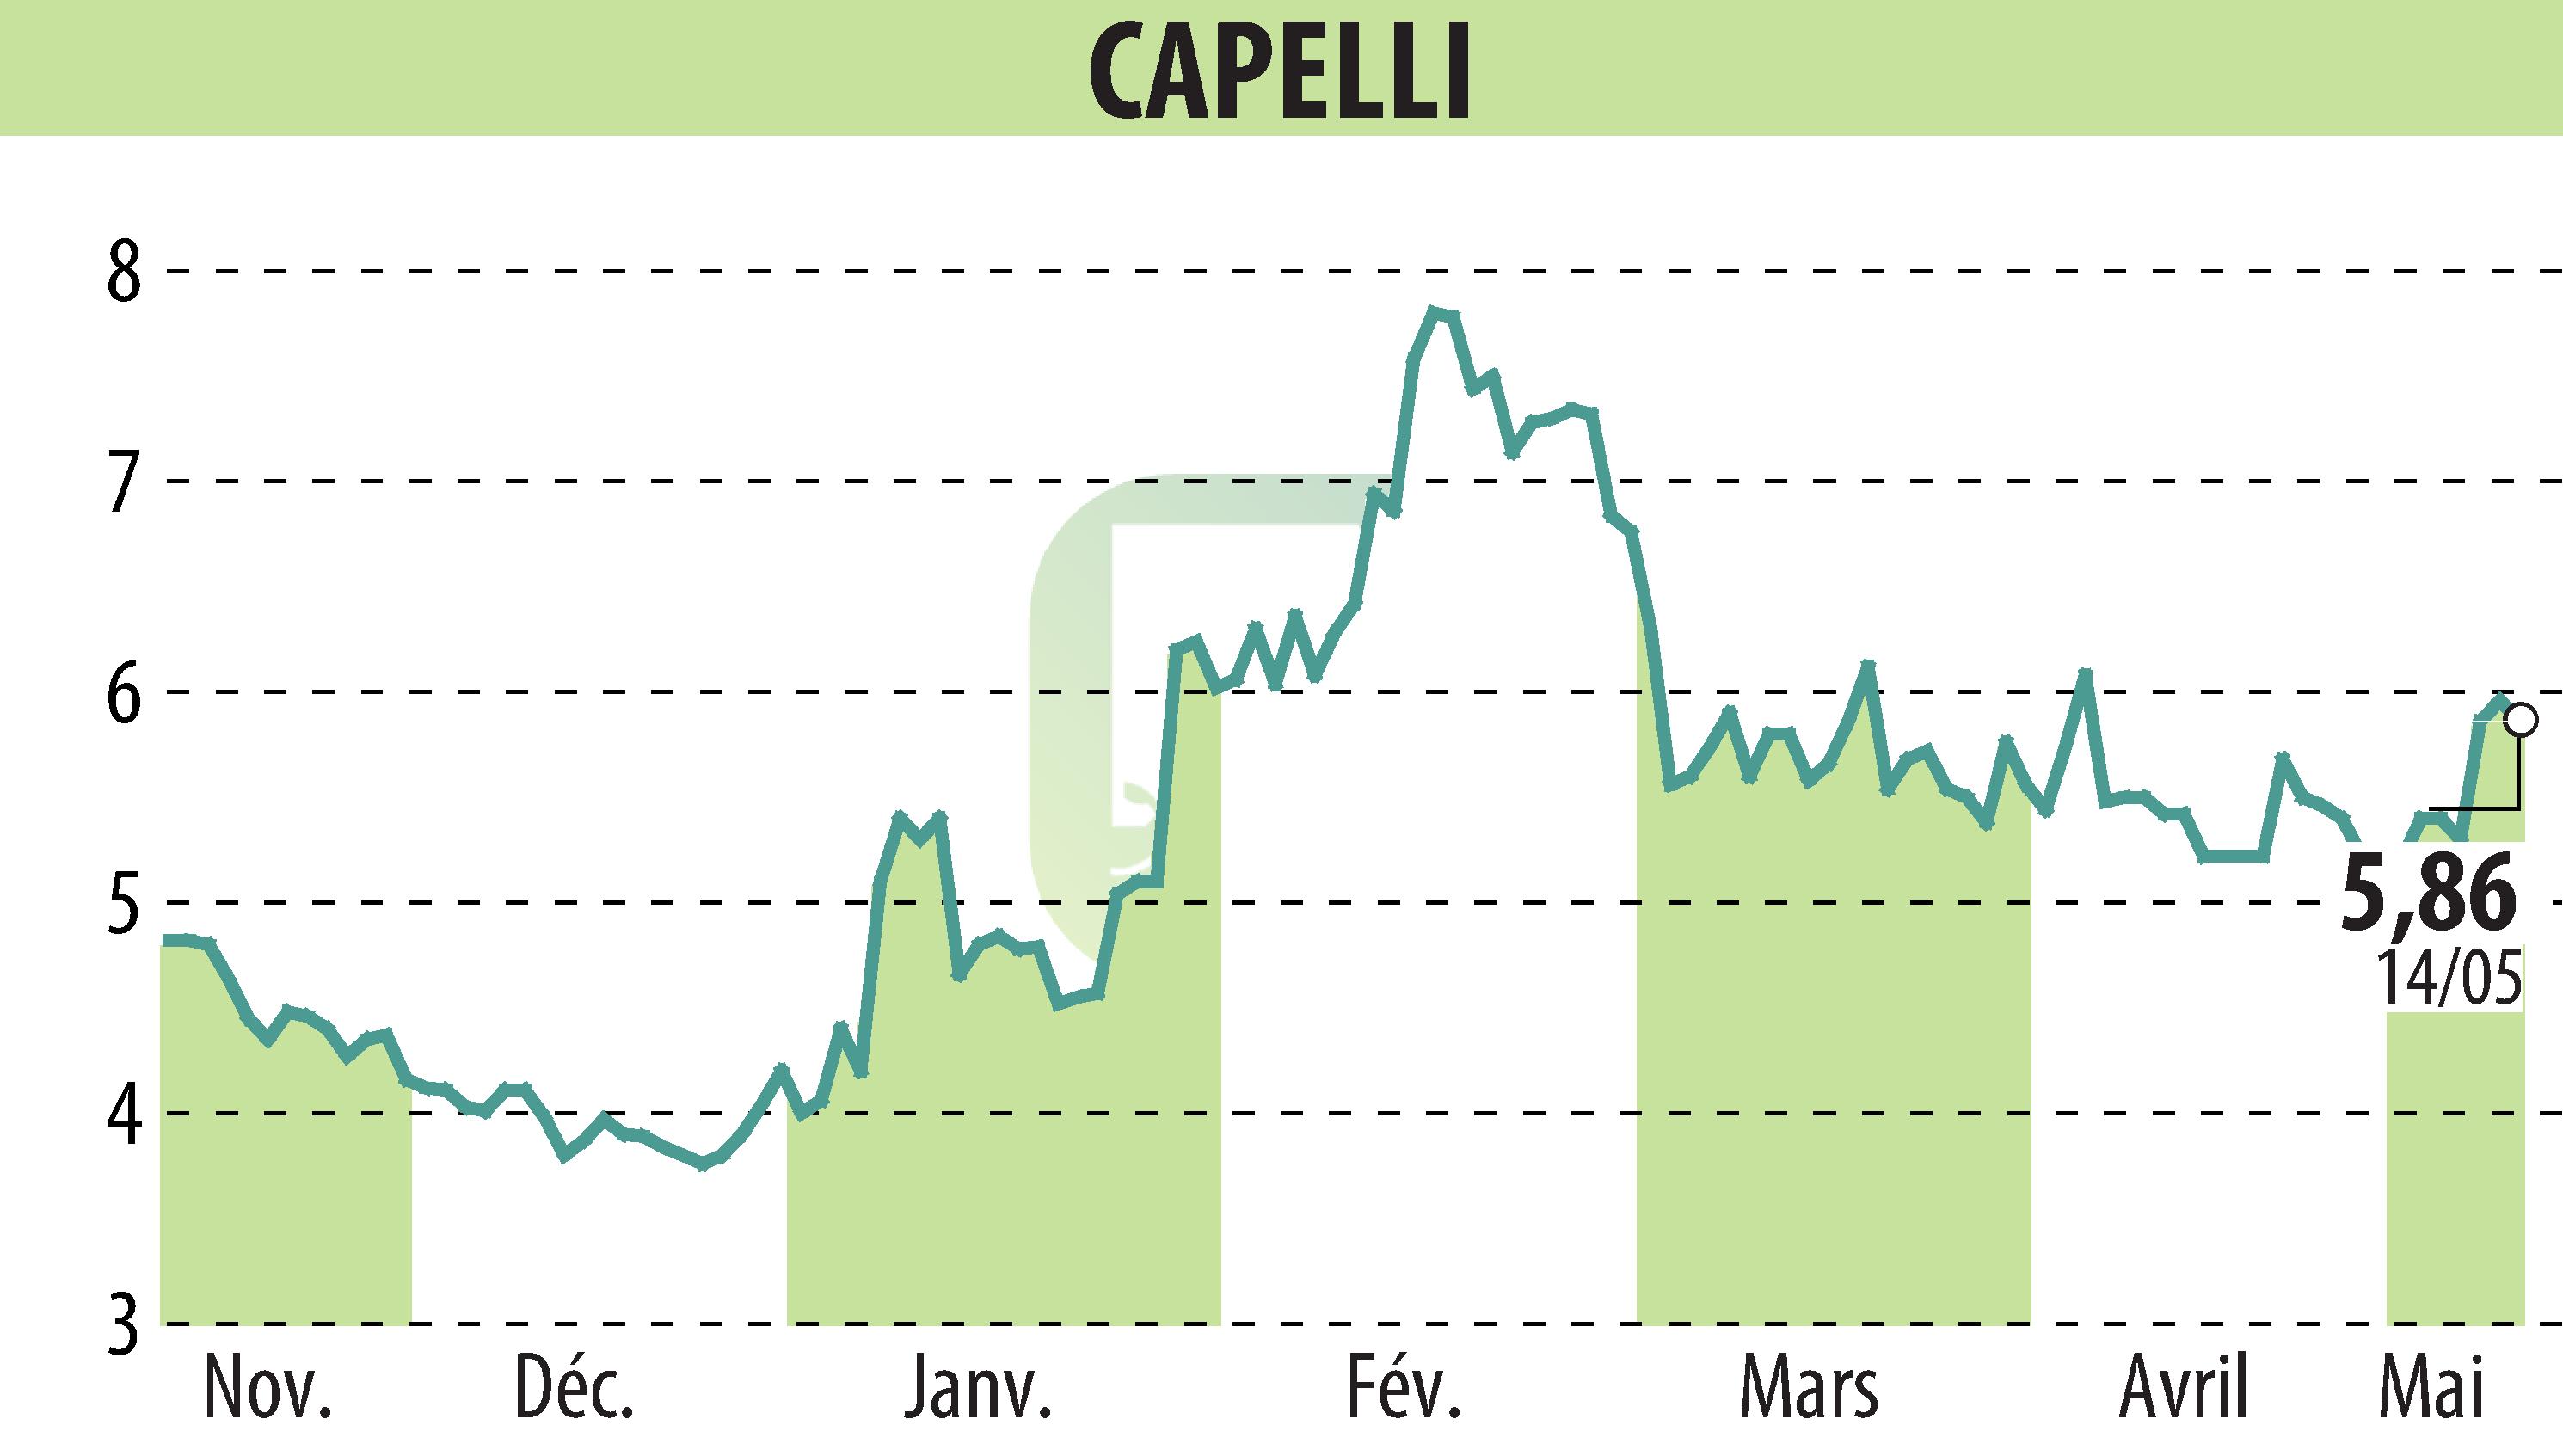 Stock price chart of CAPELLI (EPA:ALCAP) showing fluctuations.